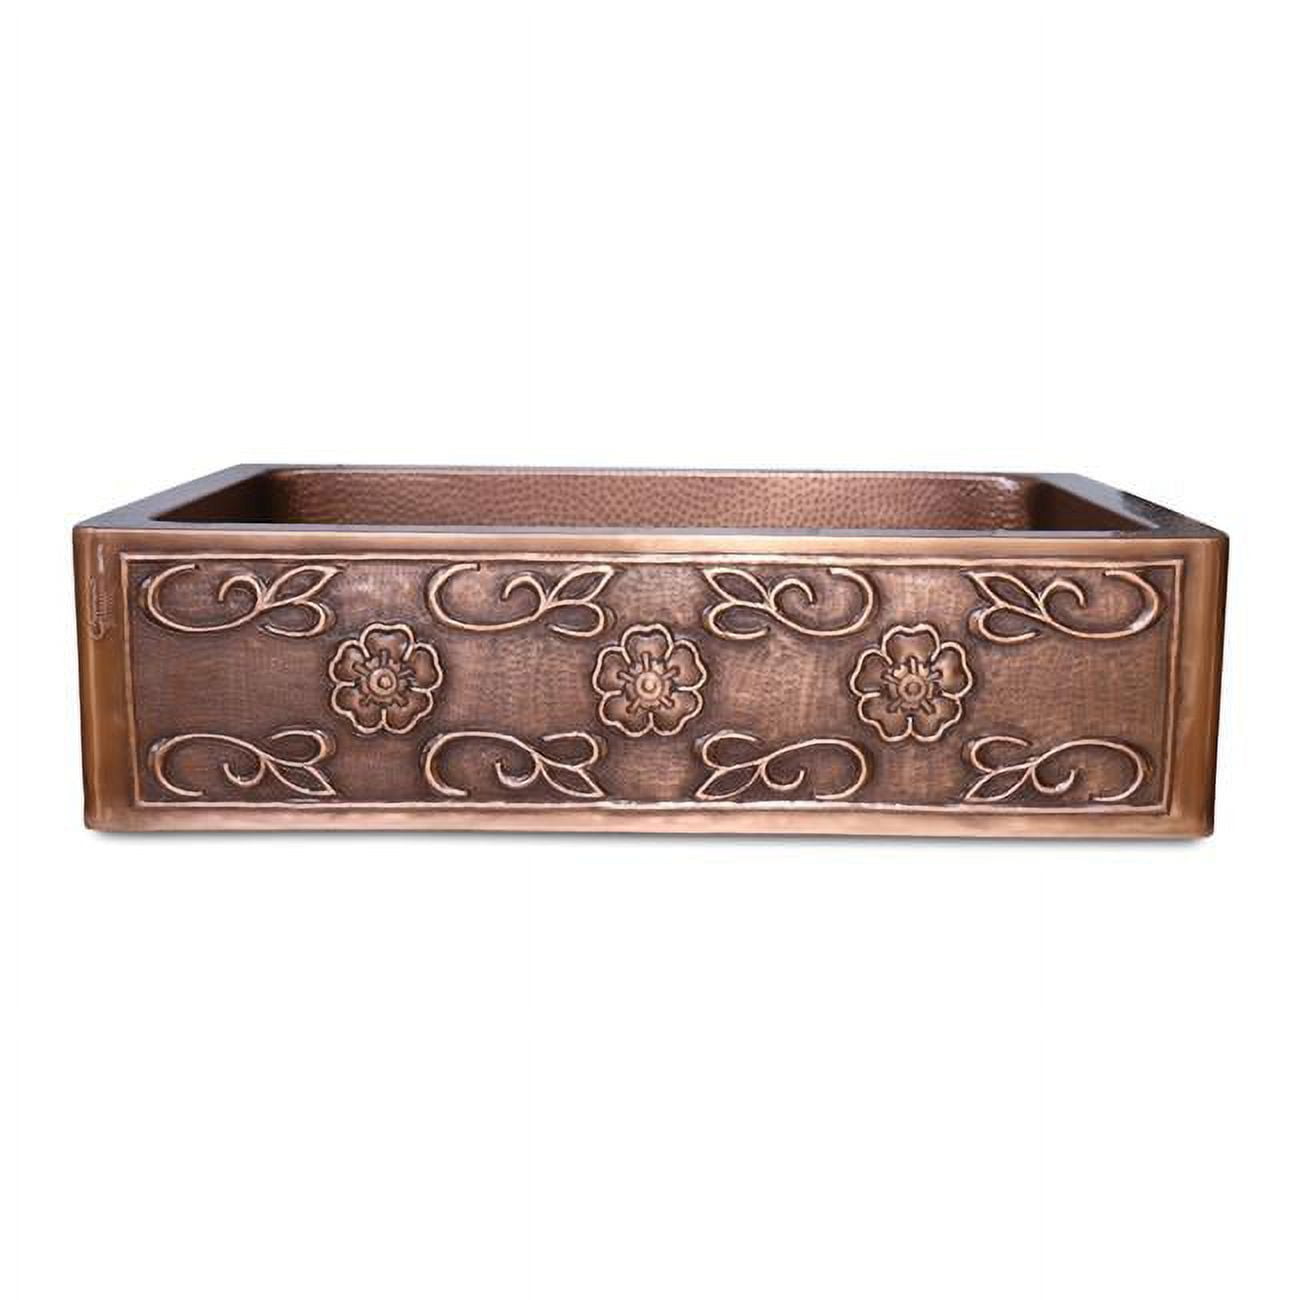 CKSSBTFPFA33.22.9 Single Bowl Three Flowers & Petals front Apron Antique Copper Kitchen Sink -  Coppersmith Creations